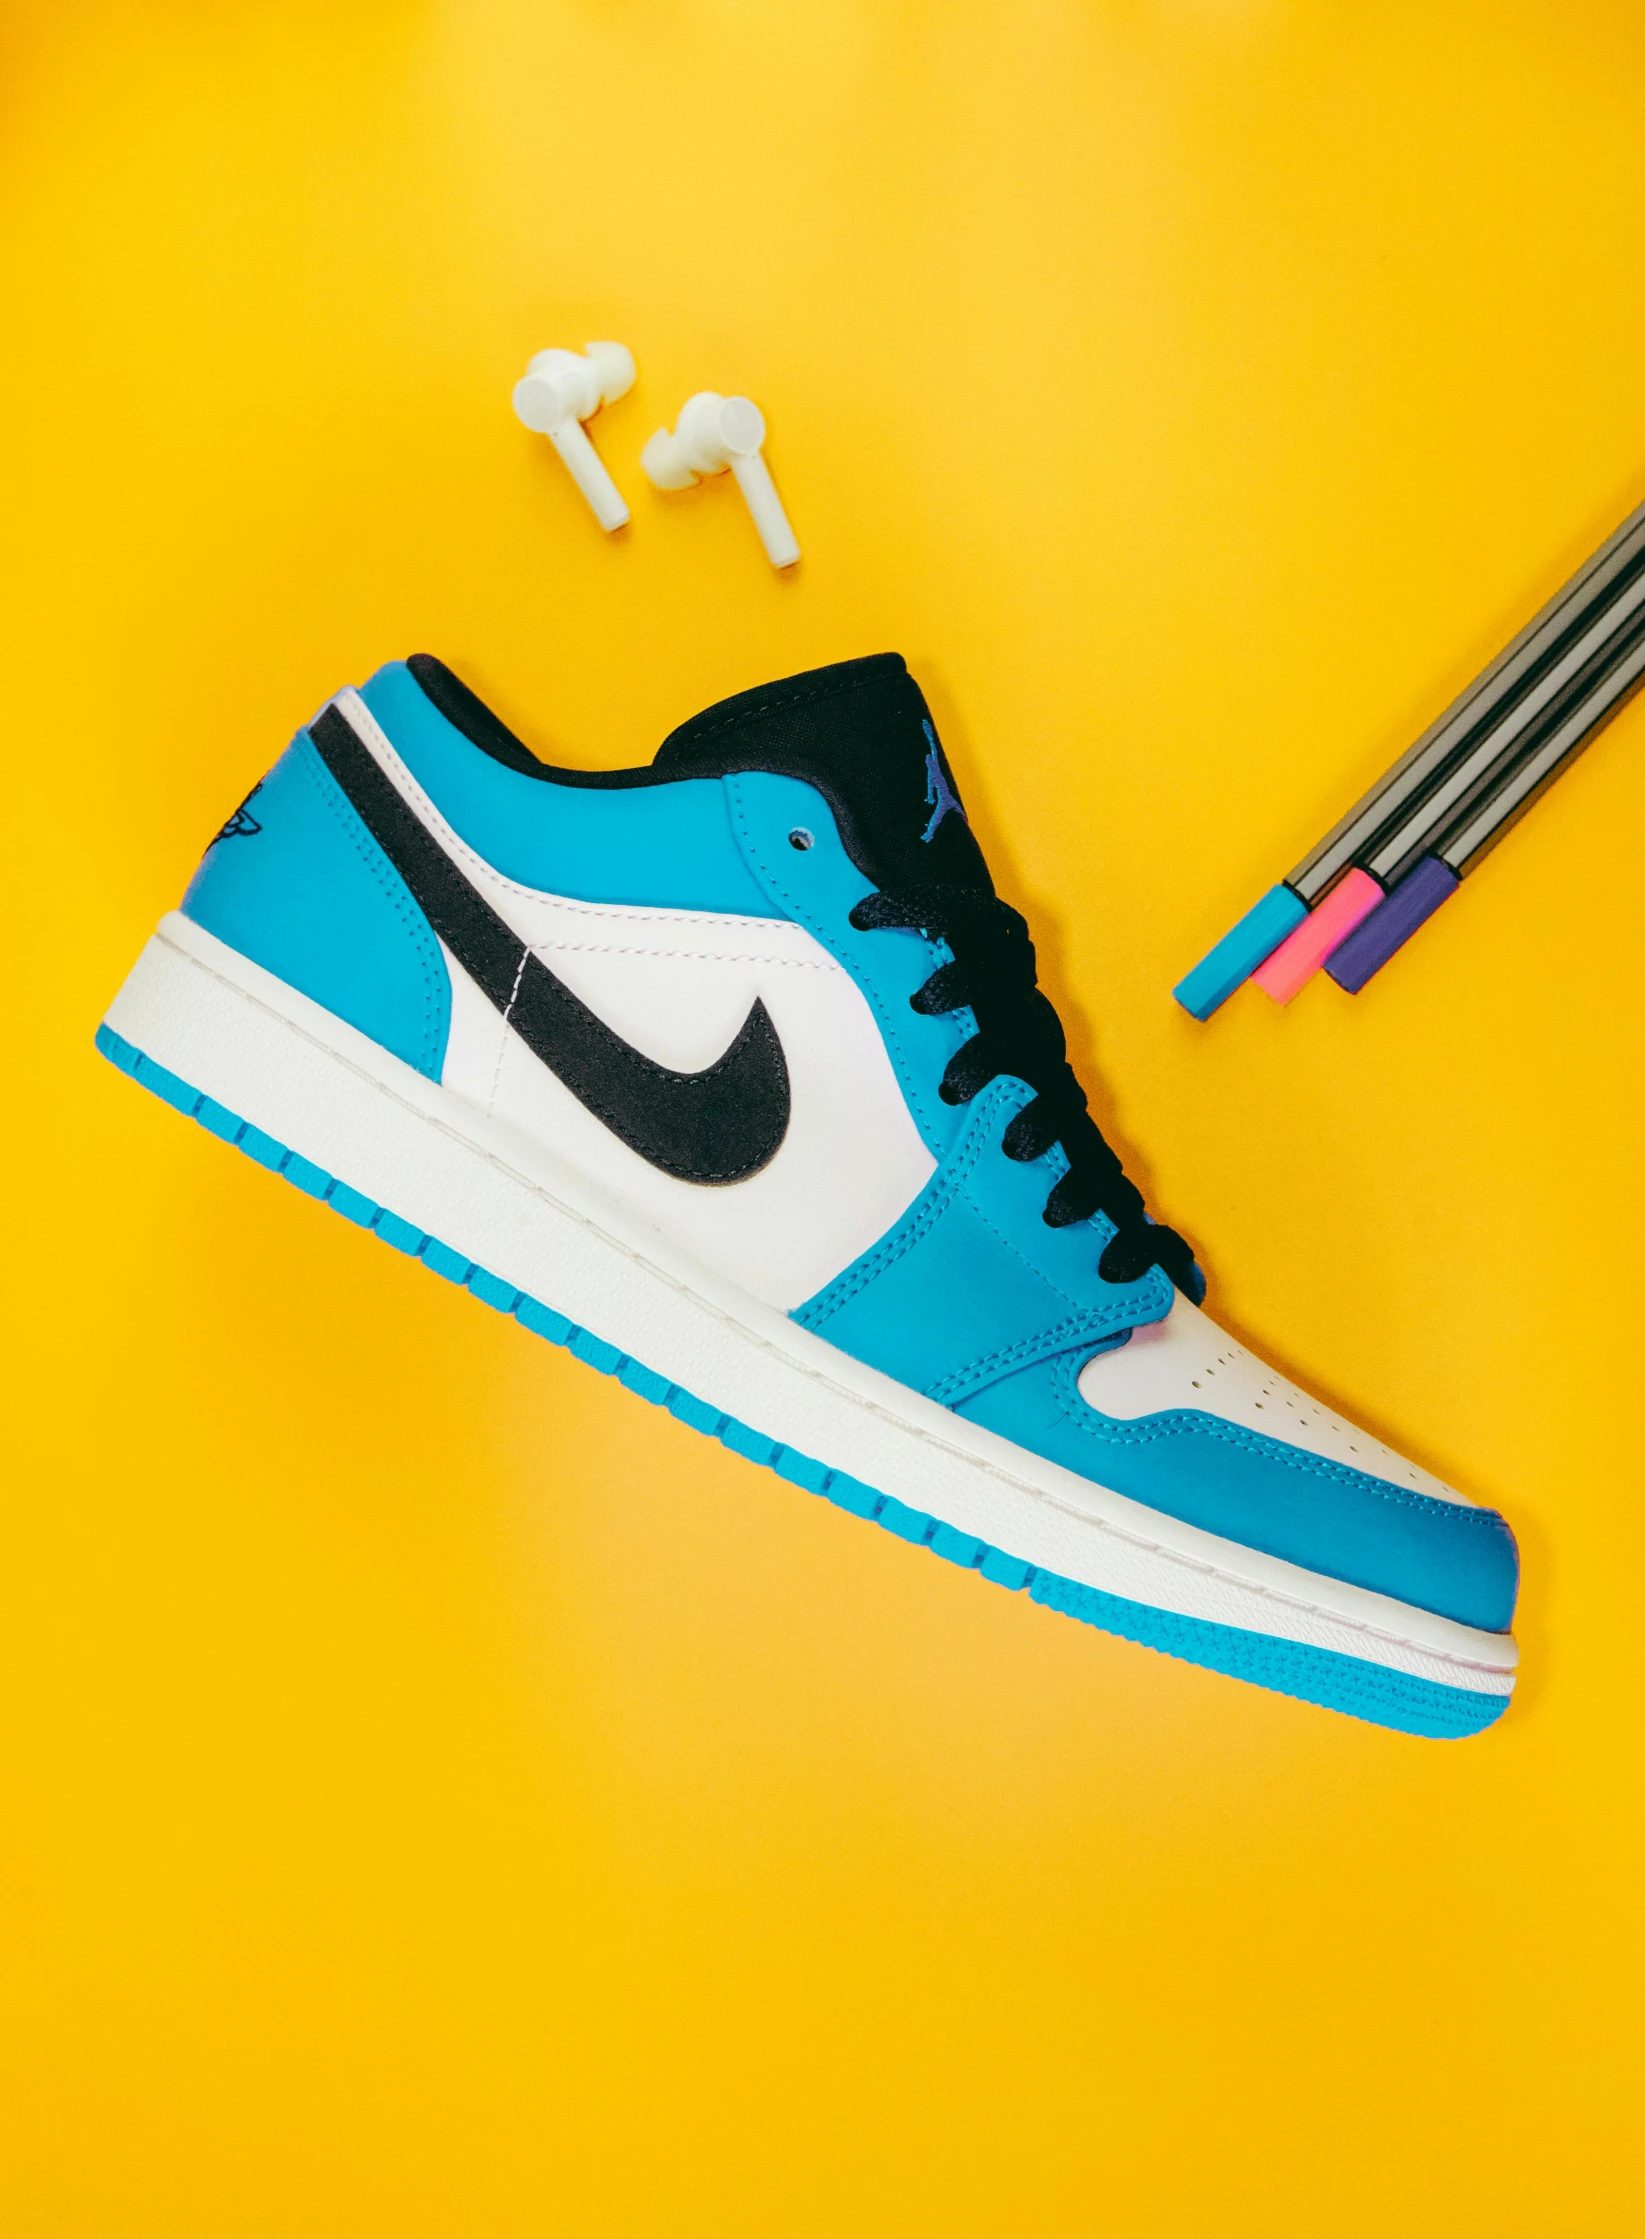 a pair of sneakers sitting on top of a yellow surface, inspired by Zhu Da, black and cyan color scheme, “air jordan 1, low shot, vibrant high contrast coloring